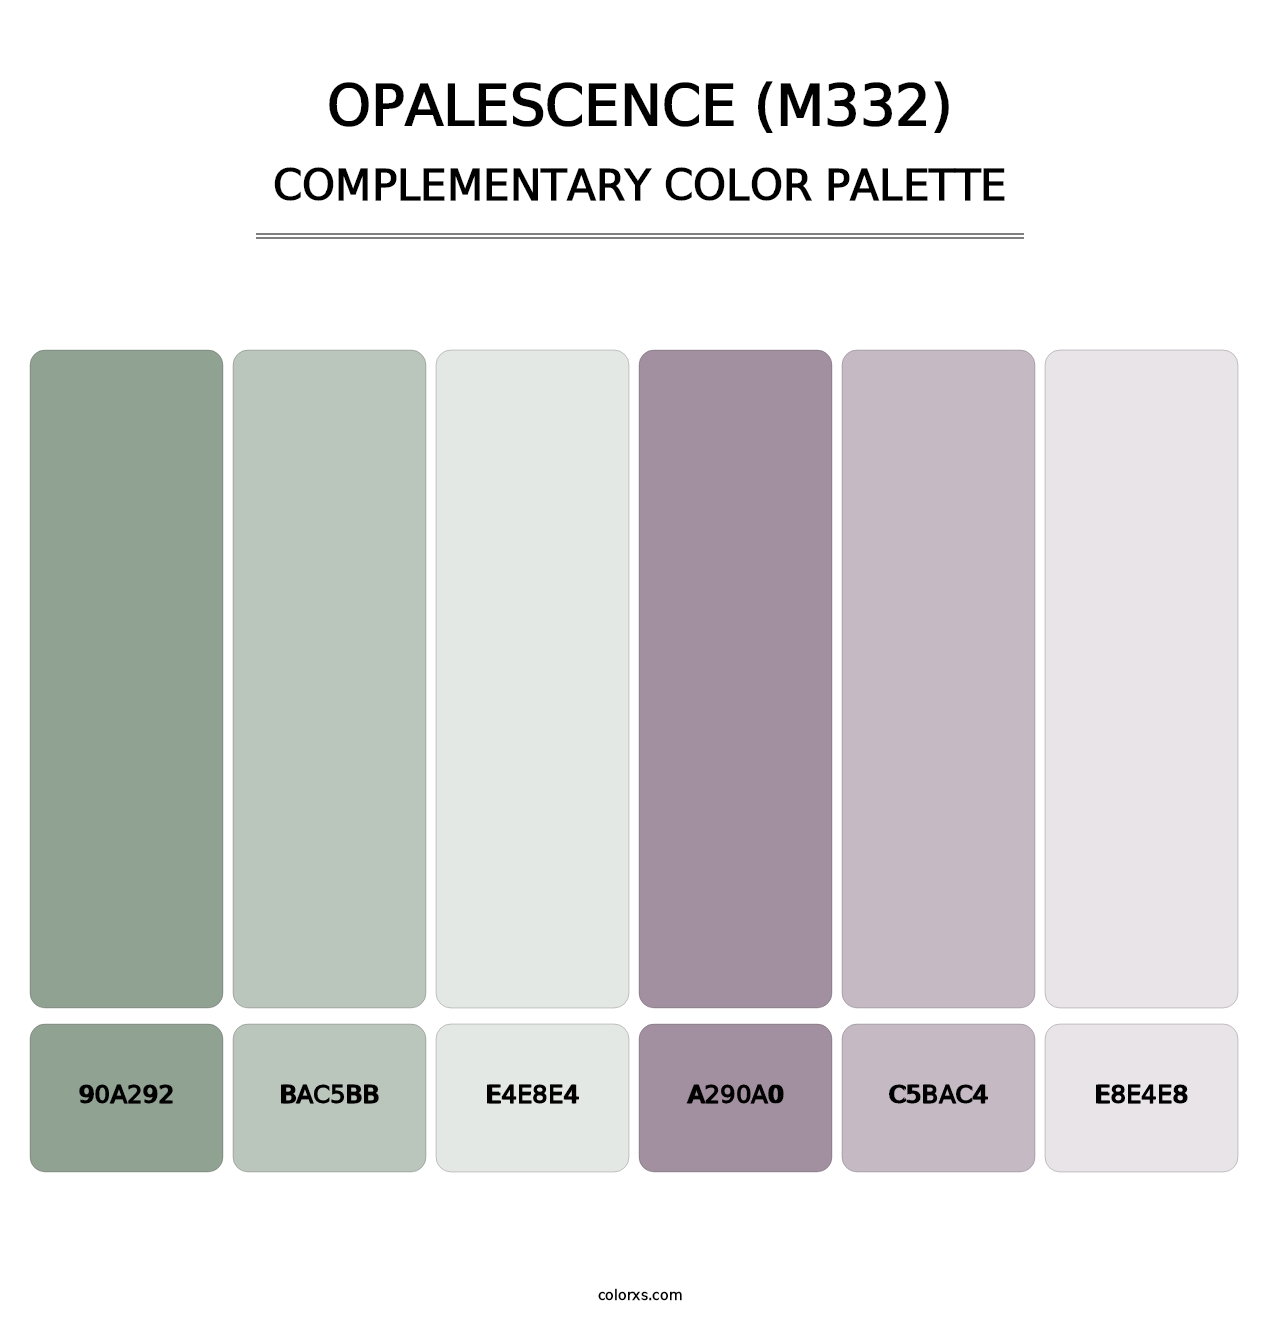 Opalescence (M332) - Complementary Color Palette